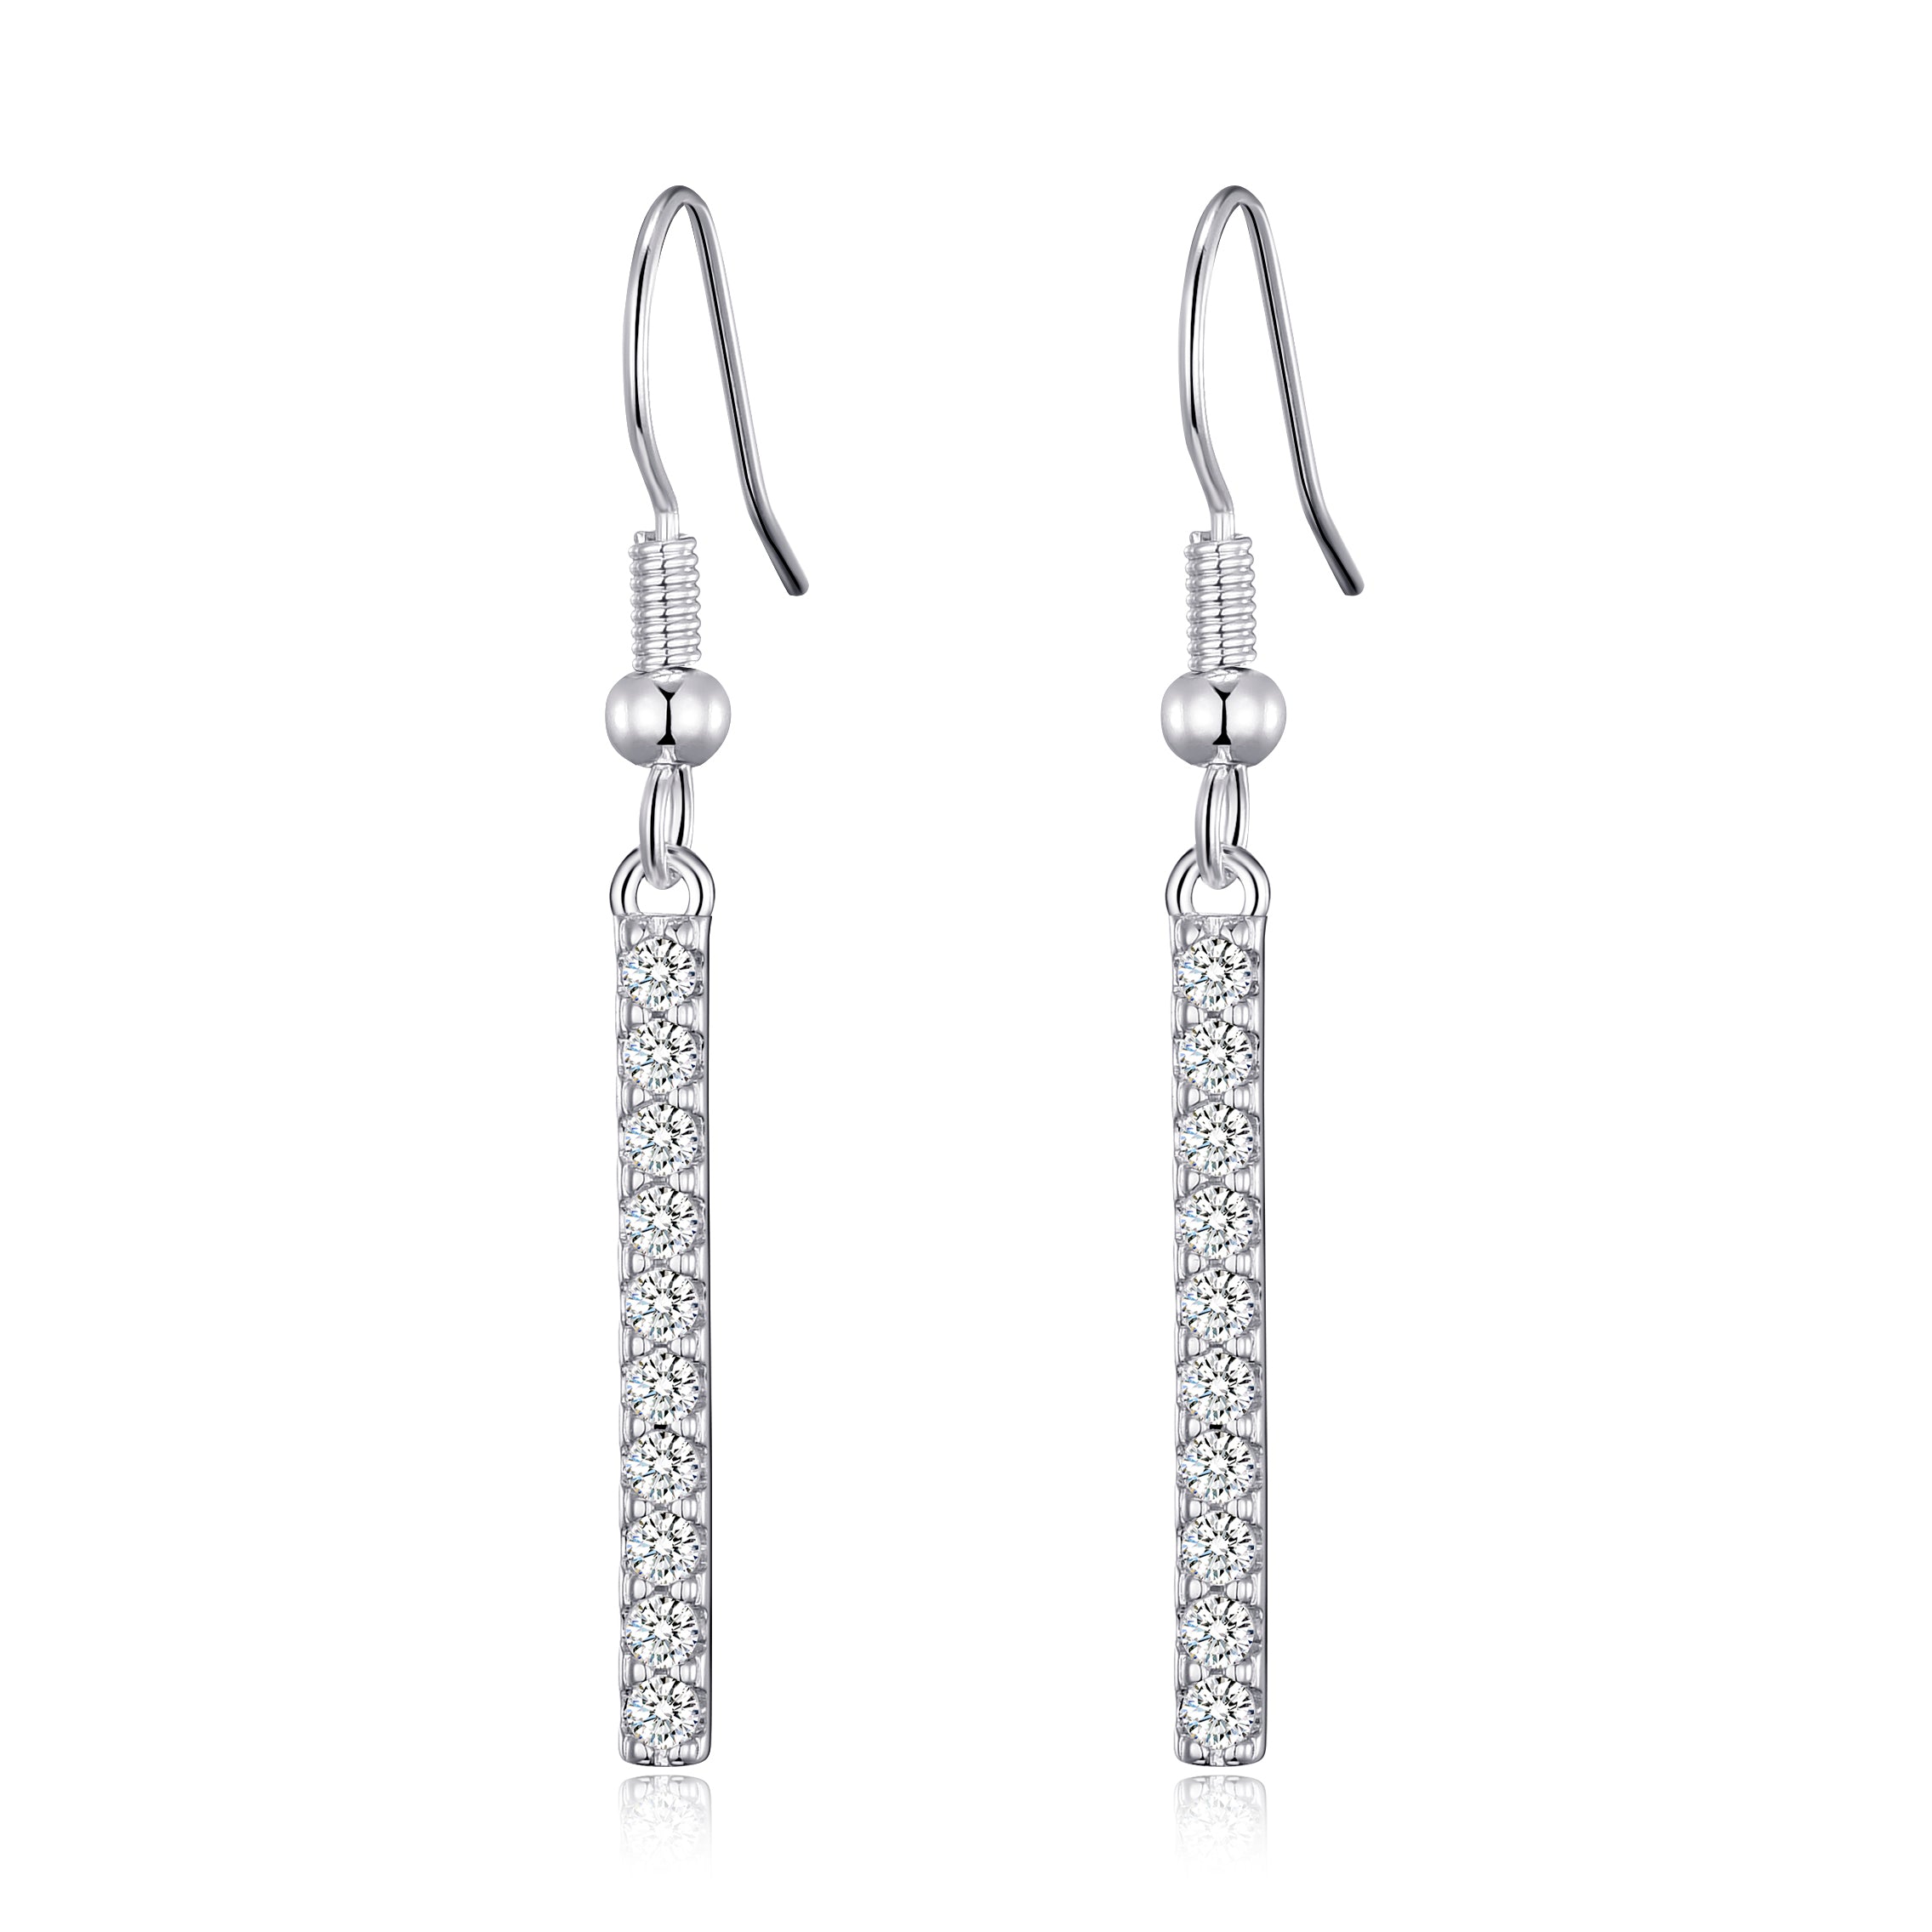 Silver Plated Crystal Bar Drop Earrings Created with Zircondia® Crystals by Philip Jones Jewellery